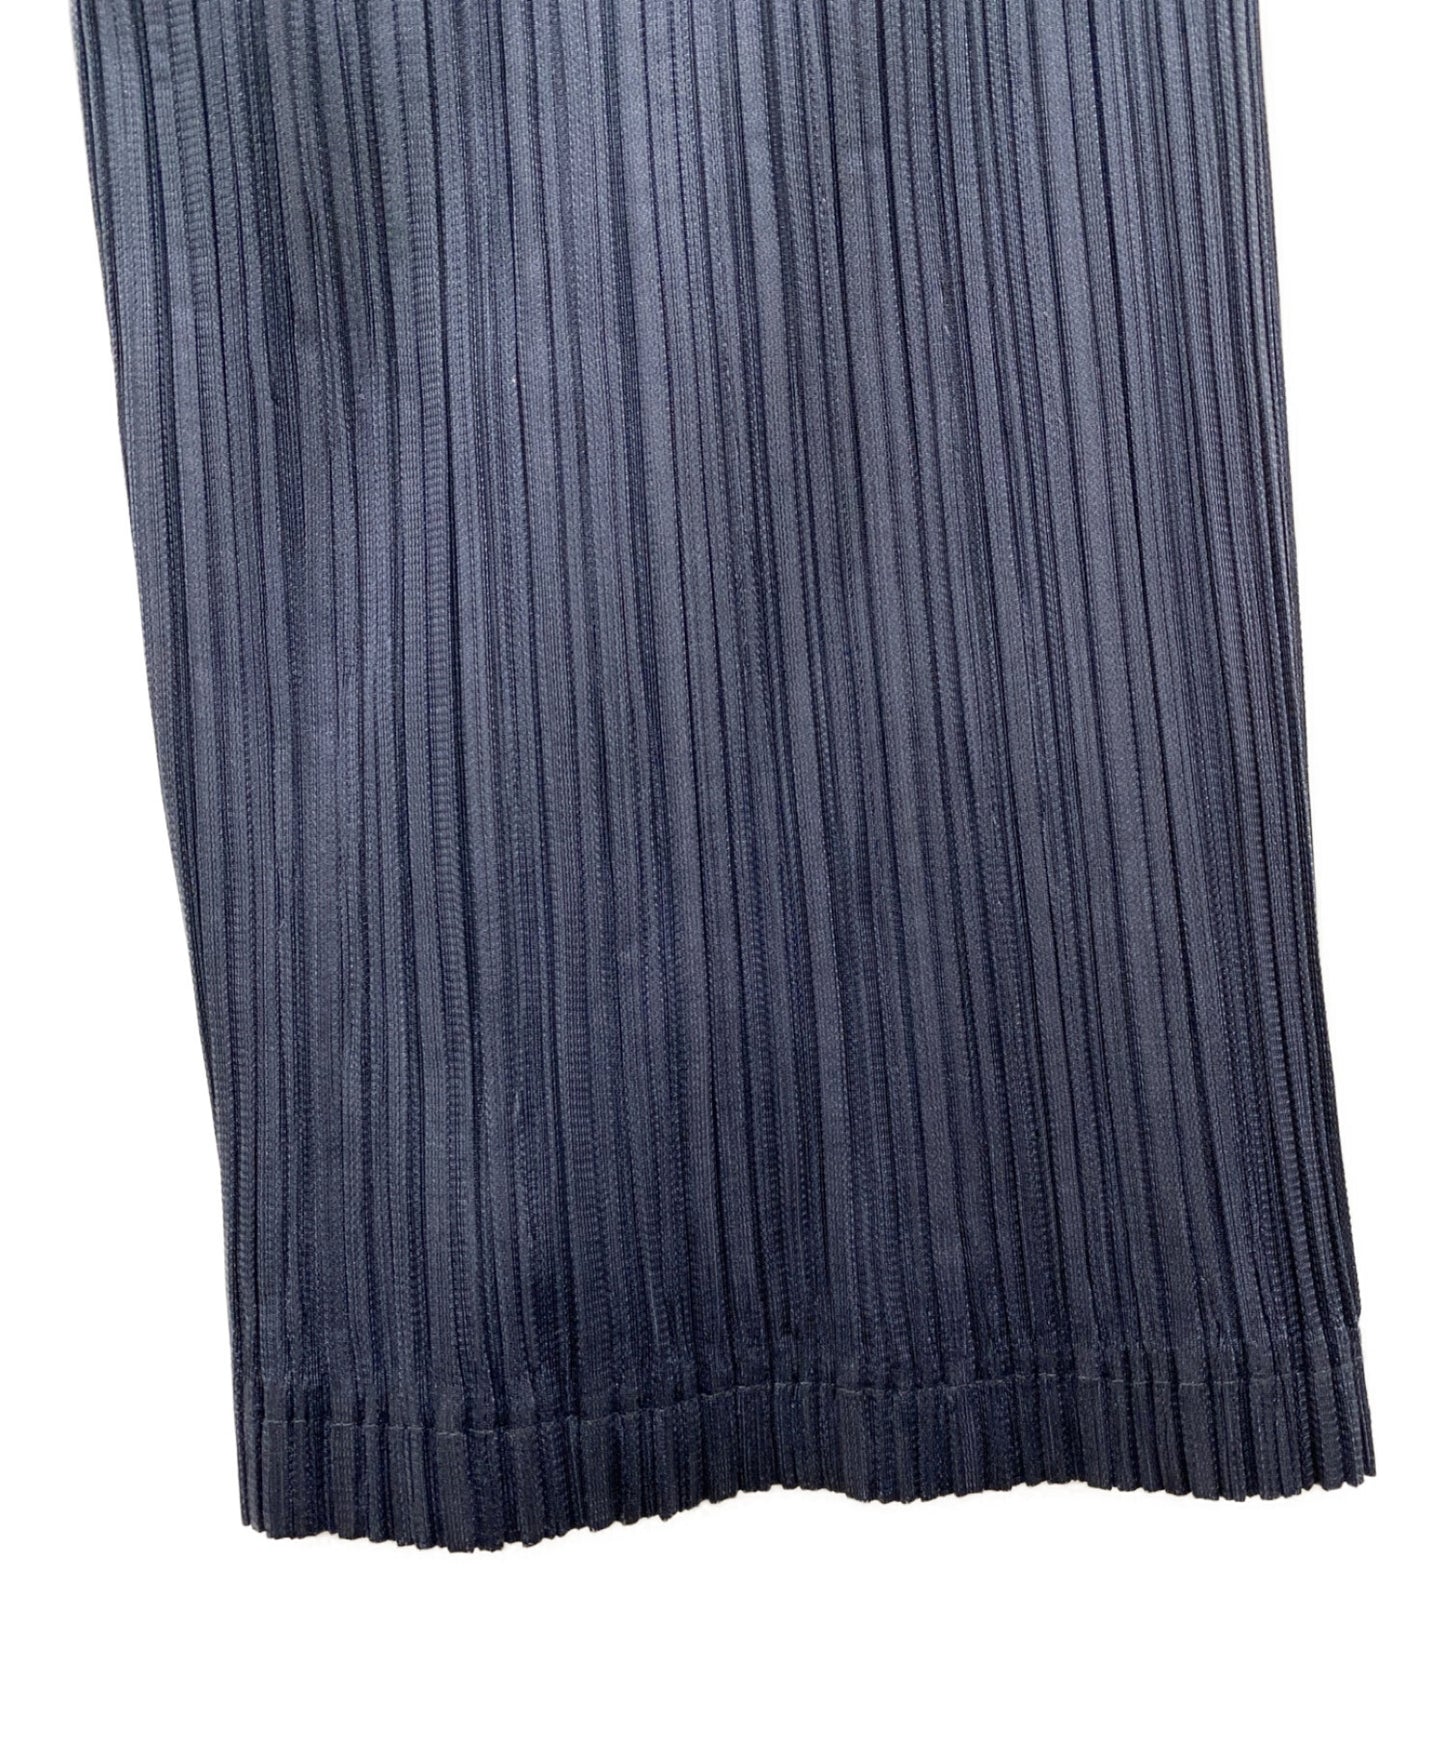 [Pre-owned] PLEATS PLEASE pleated pants PP53-JF423